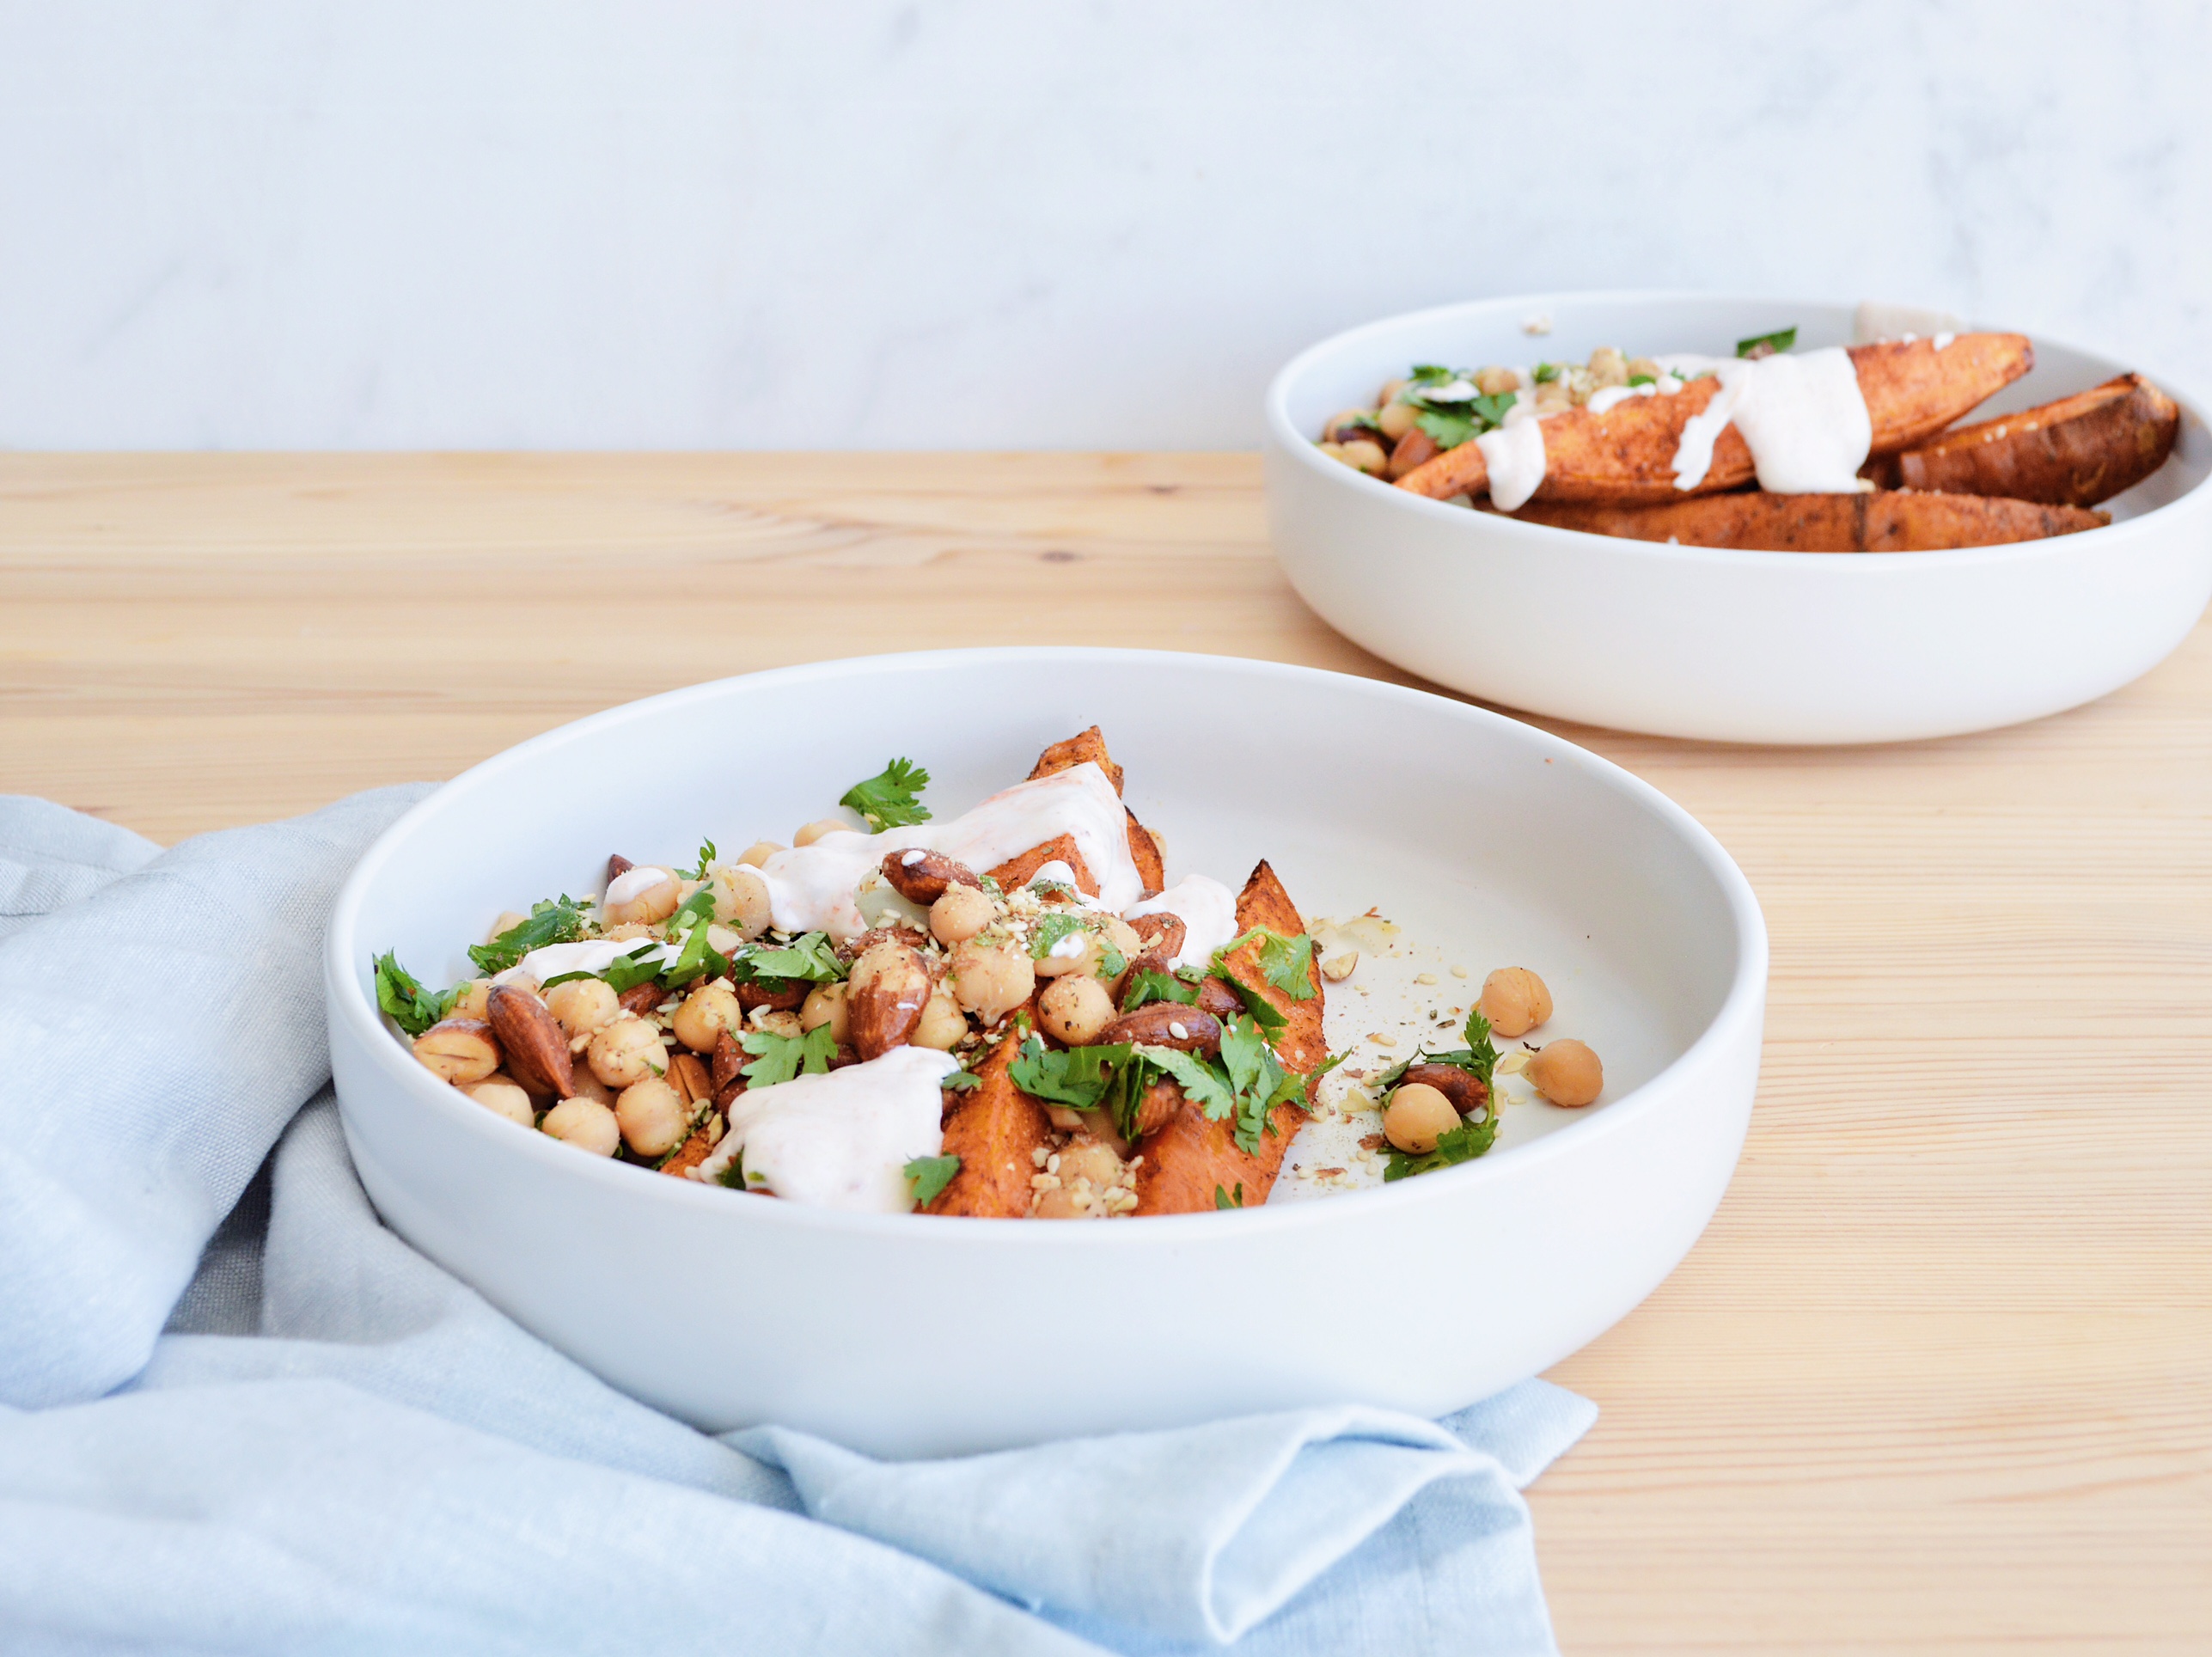 Spiced sweet potato and chickpea salad